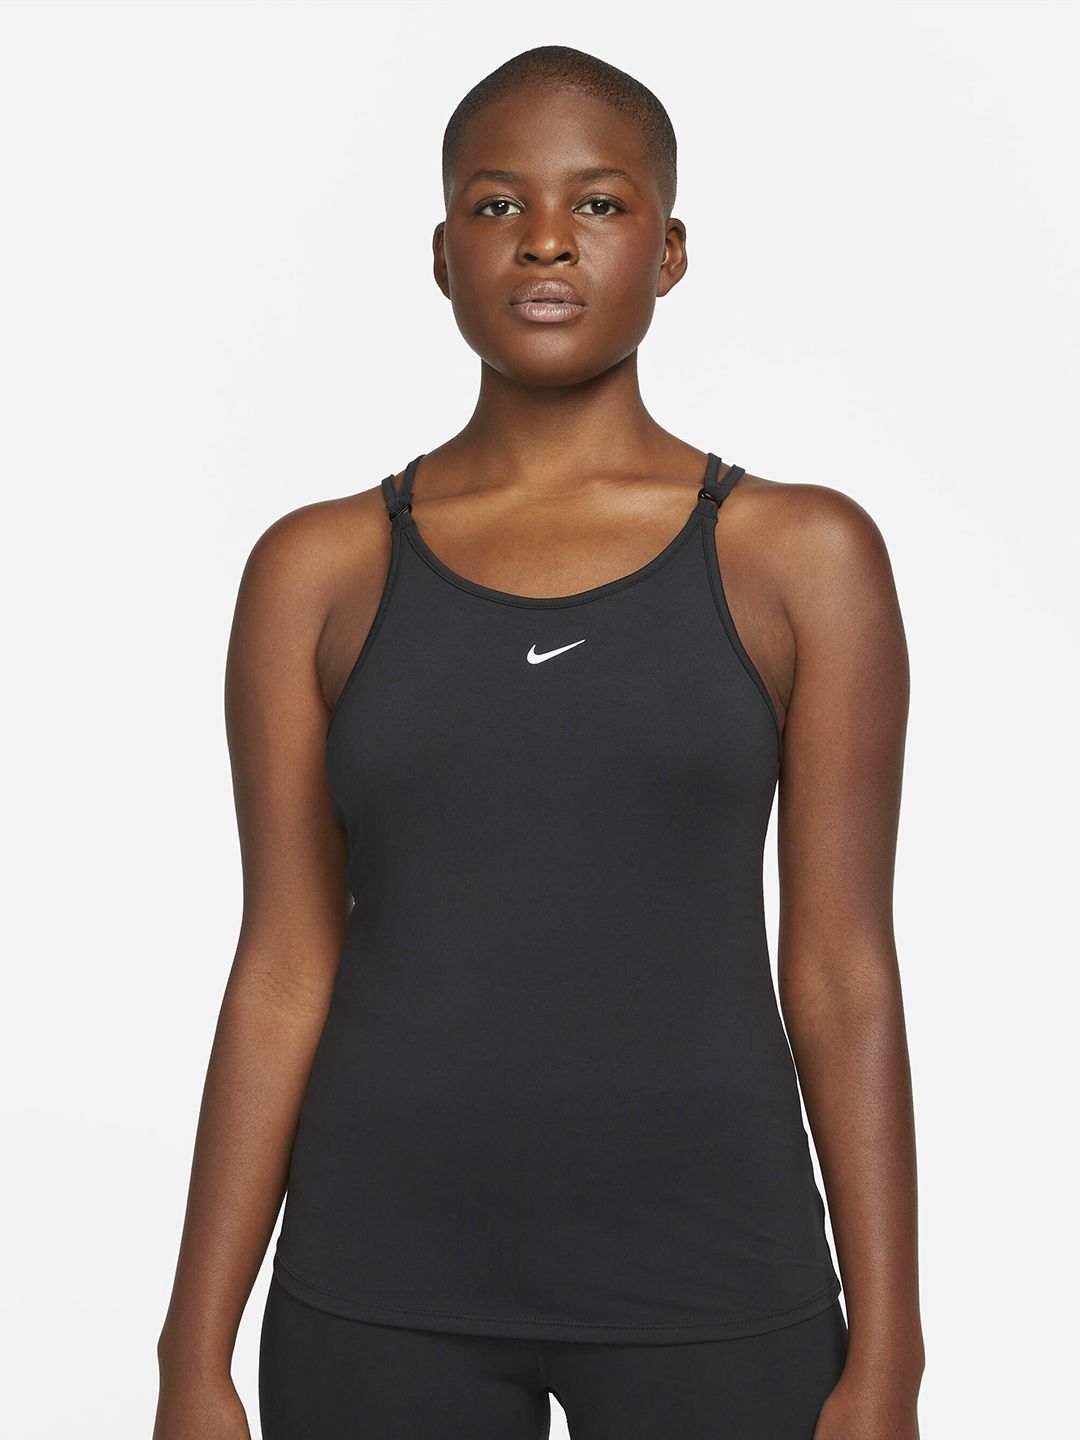 Nike Women Dri-FIT One Luxe Slim Fit Strappy Tank Top Price in India